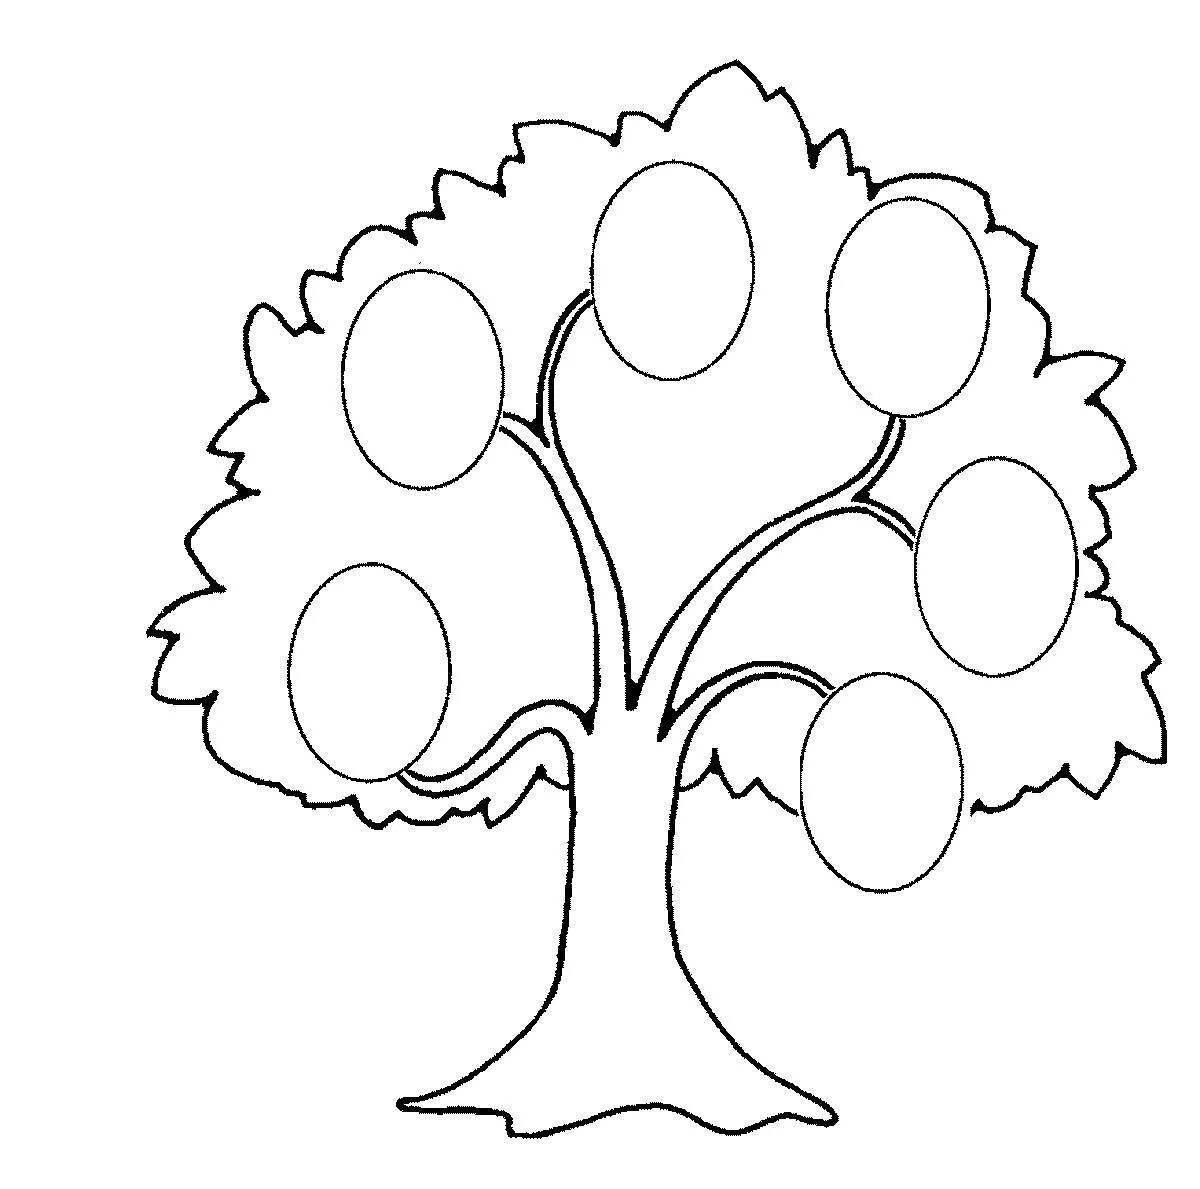 Living tree coloring pages